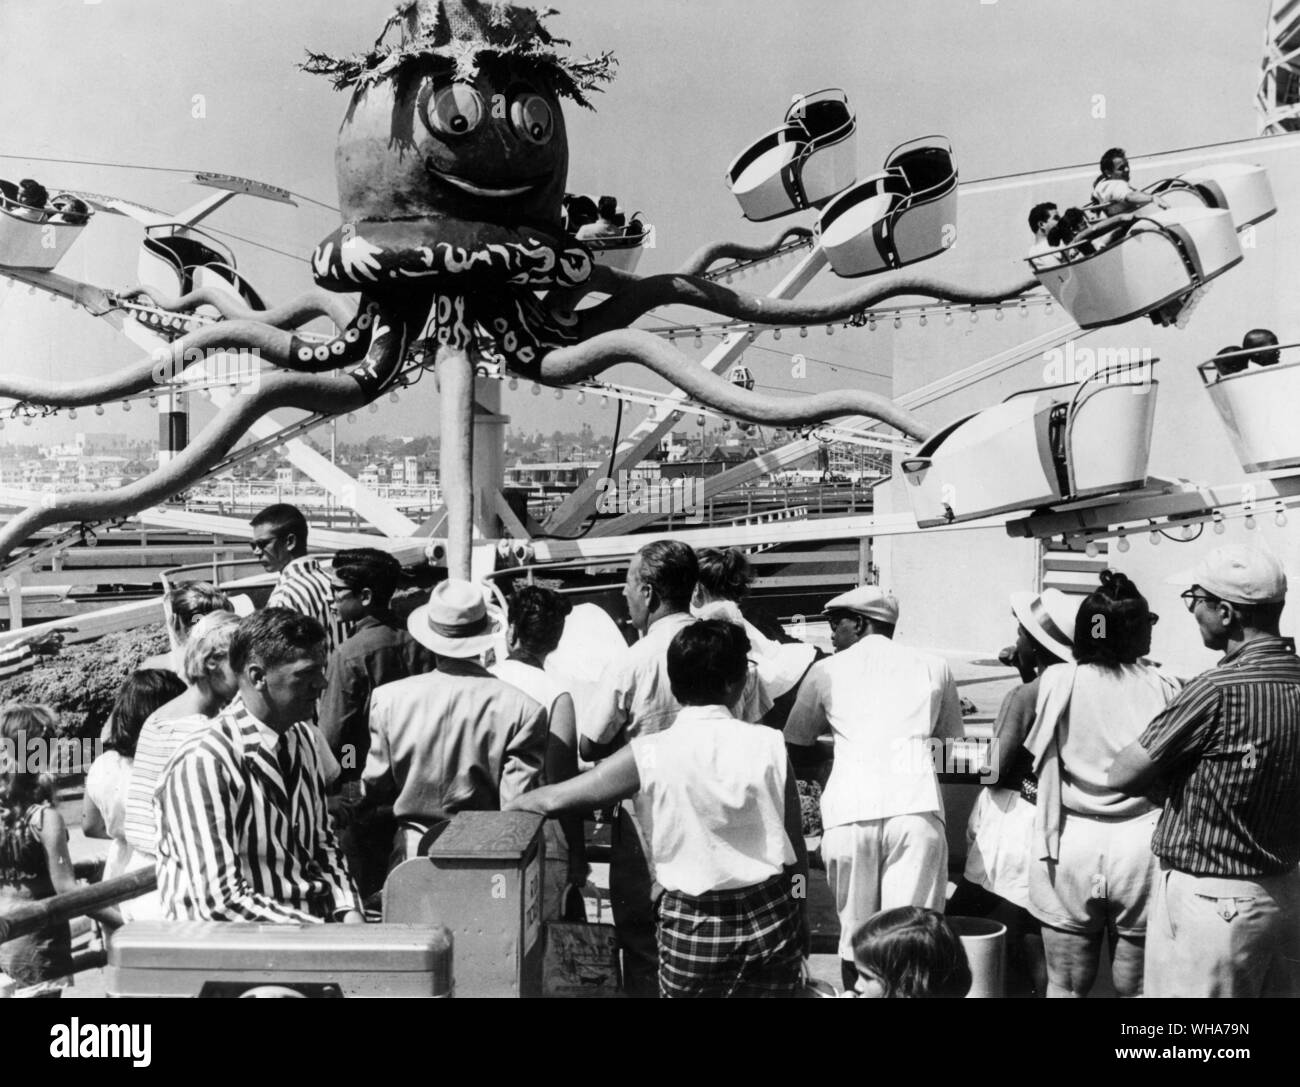 Mr Octopus at the fun fair at Pacific Ocean Park California. His outstretched tentacles support rotating seats designed to give passengers the thrill of their lives. 1953 Stock Photo